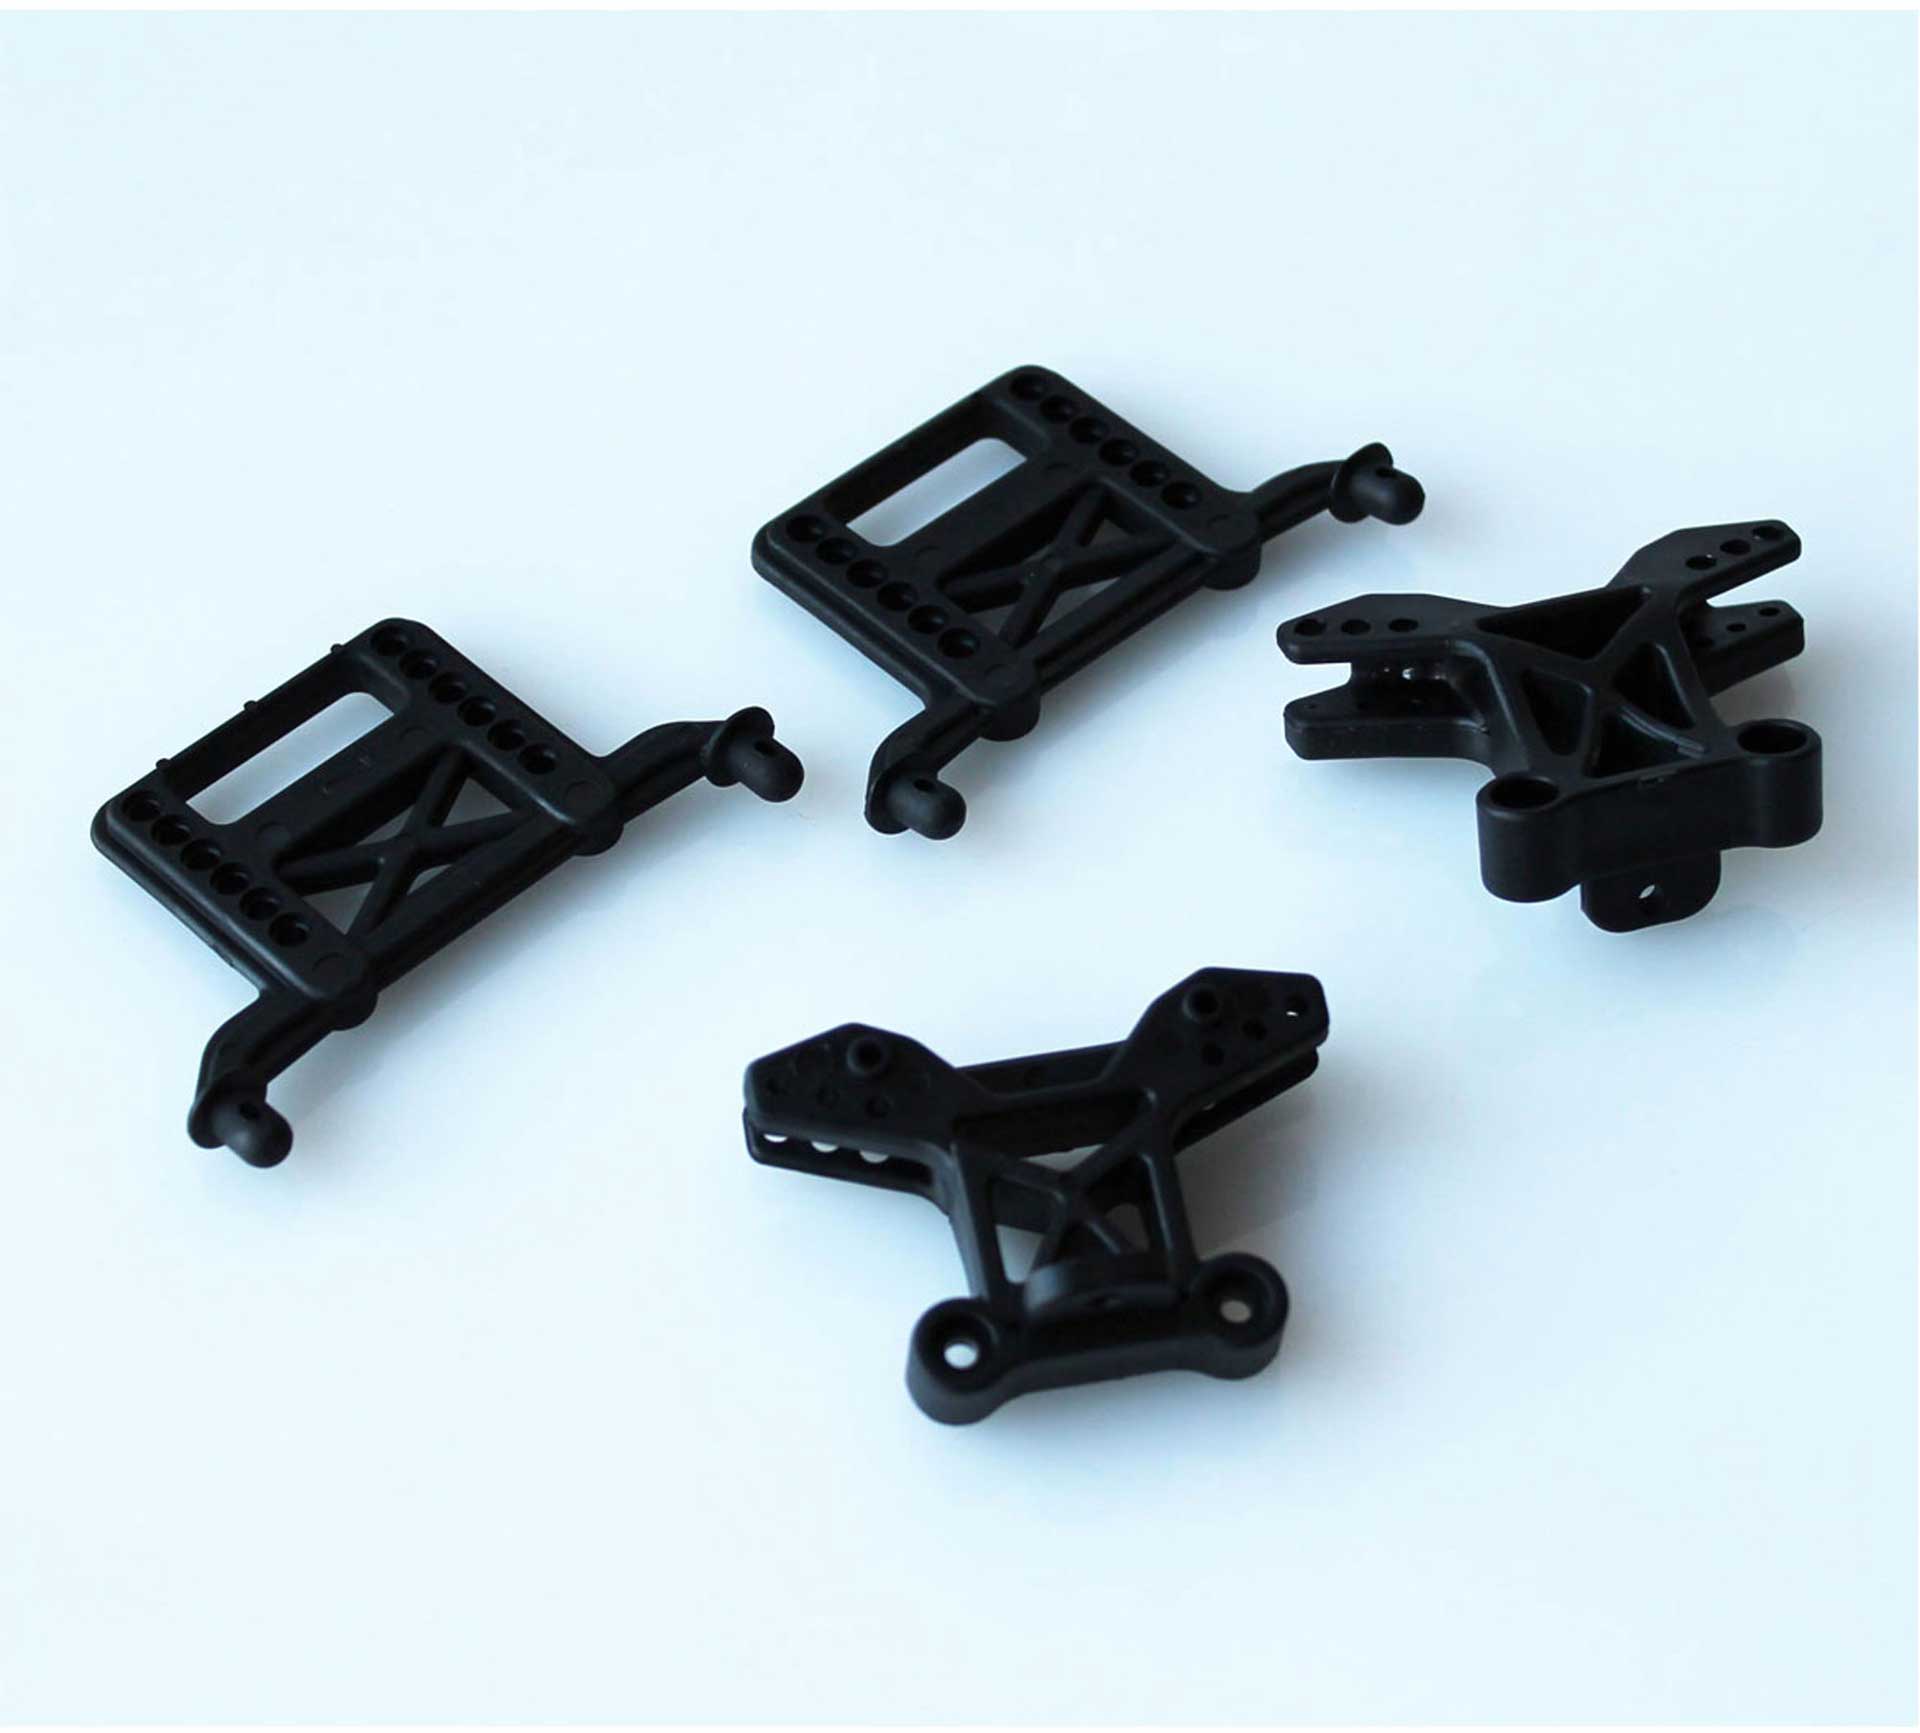 DRIVE & FLY MODELS CARRIAGE /CUSHION  FASTENER  HAMMER DF 3221